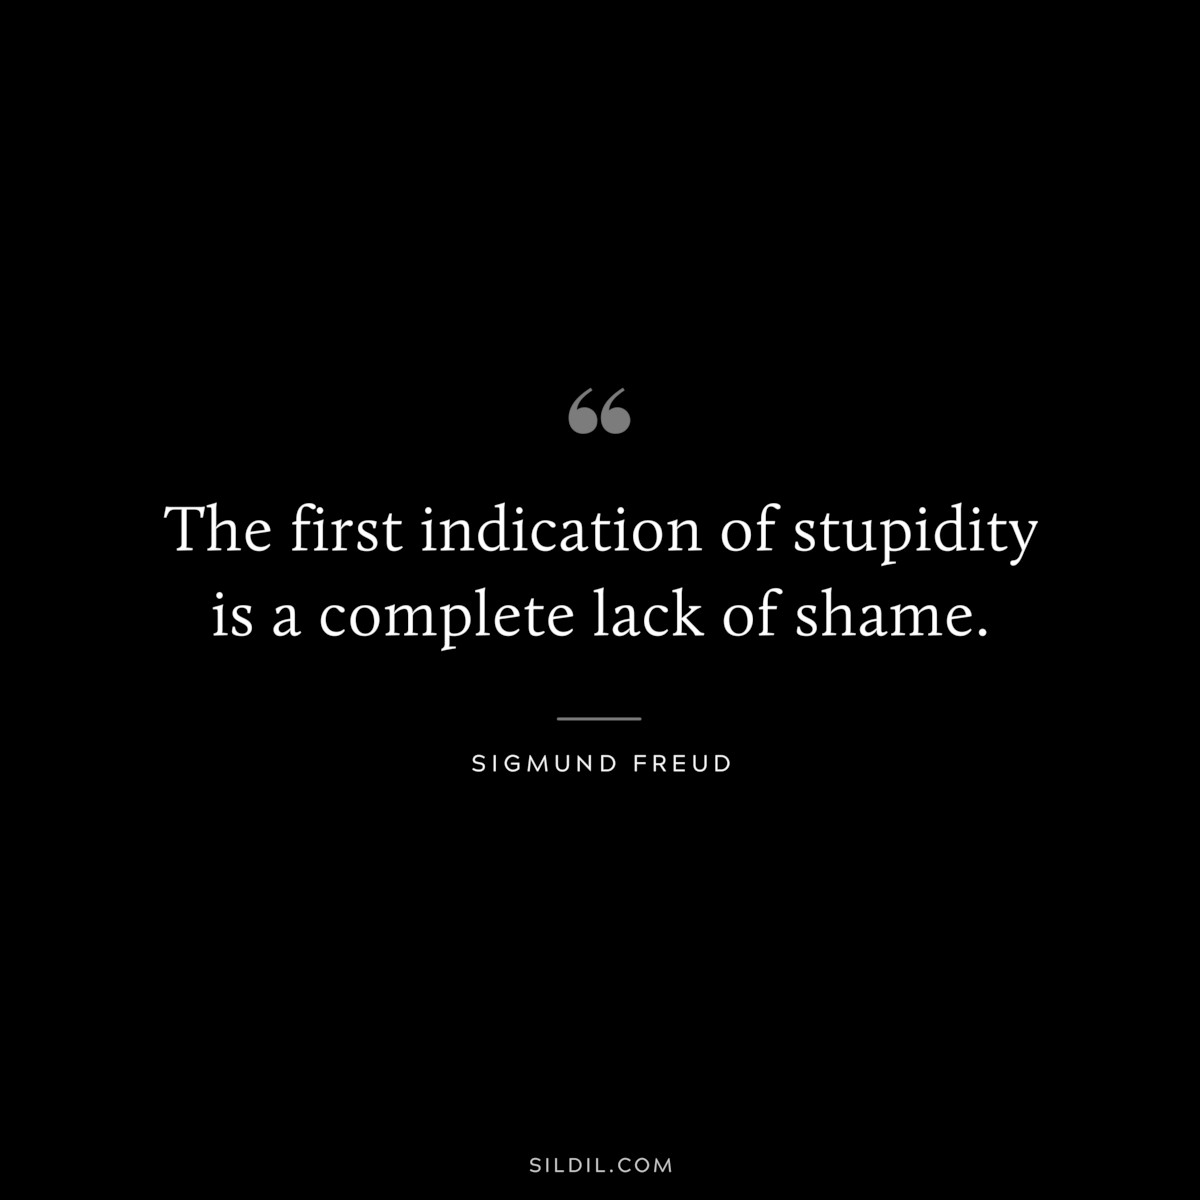 The first indication of stupidity is a complete lack of shame. ― Sigmund Frued